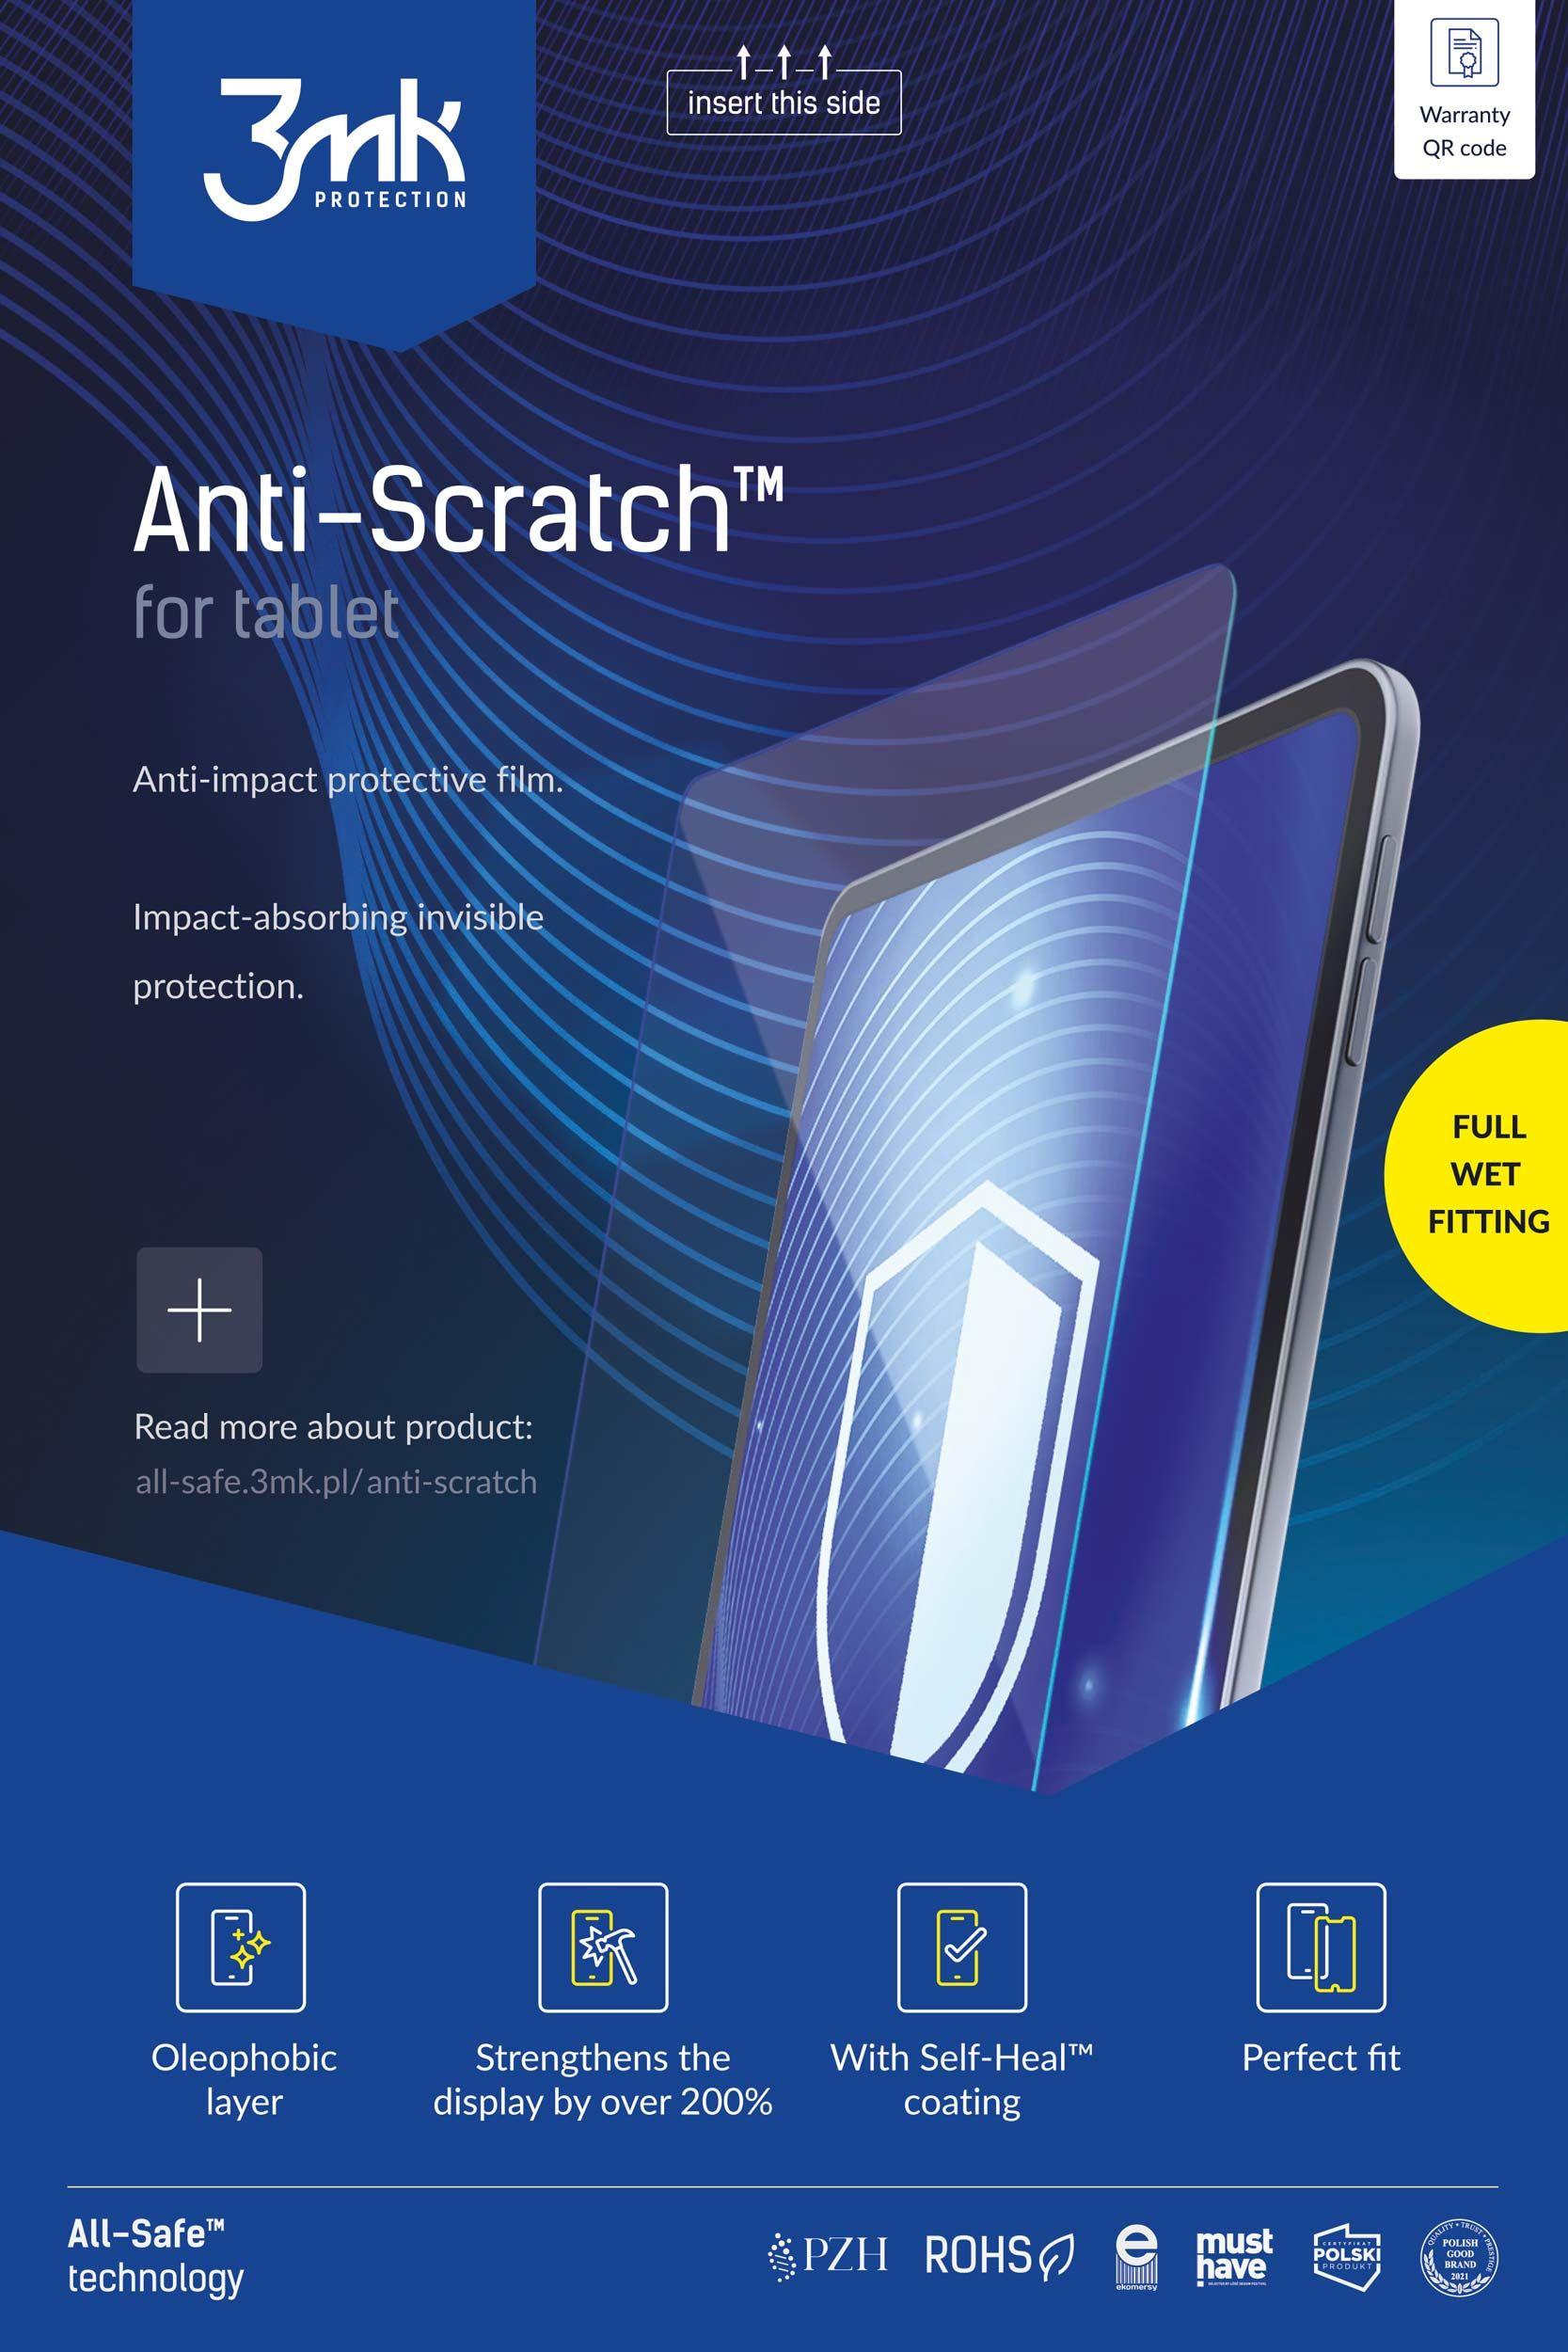 Protective films 3mk All-Safe - AIO Anti-Scratch Tablet Full Wet Fitting 5 pcs (only compatible with the new plotter)